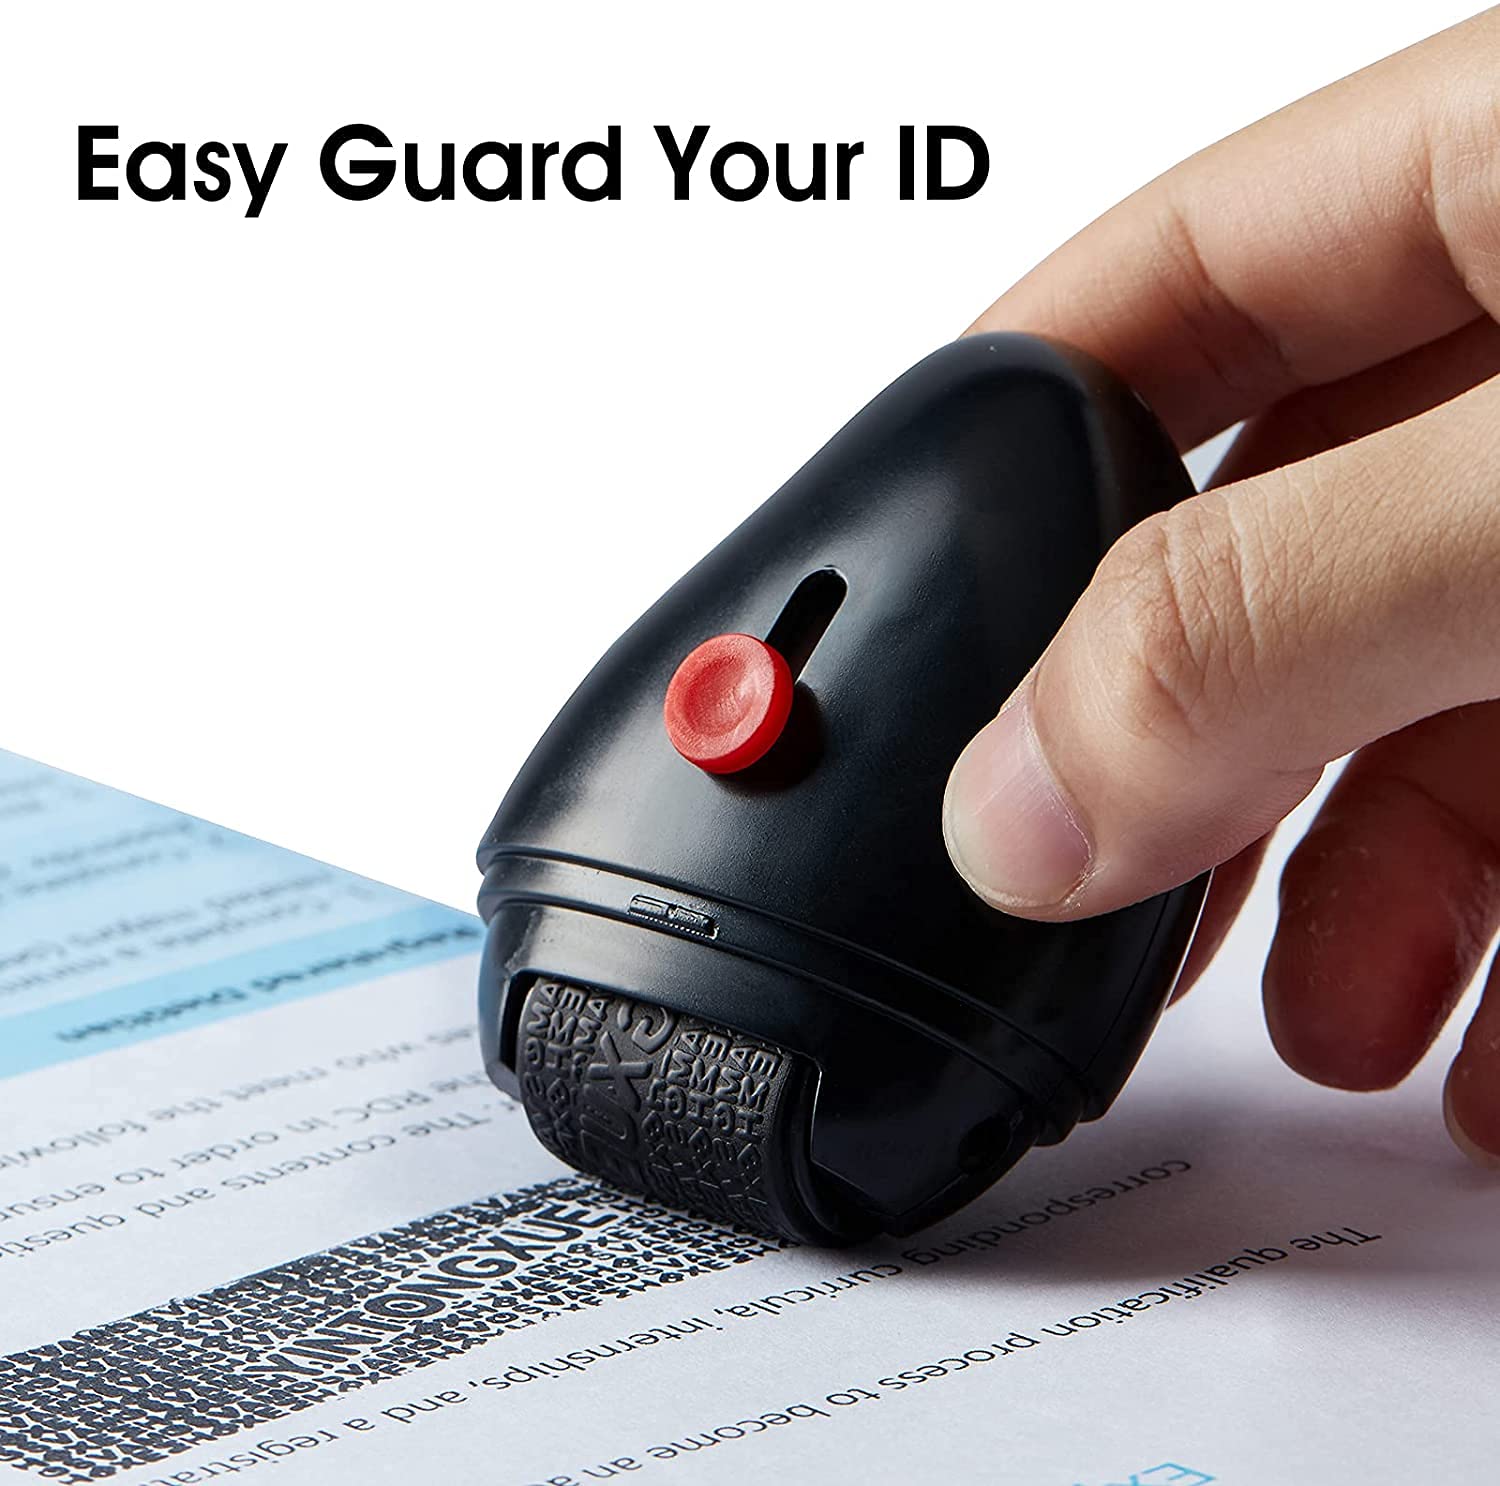 SkyShopy Identity Protection Roller Stamp Guard Your ID Stamp Roller with Cutting Tool Designed for Anti-Theft, Protect Your Confidential Address, Bank Statement, Personal Privacy